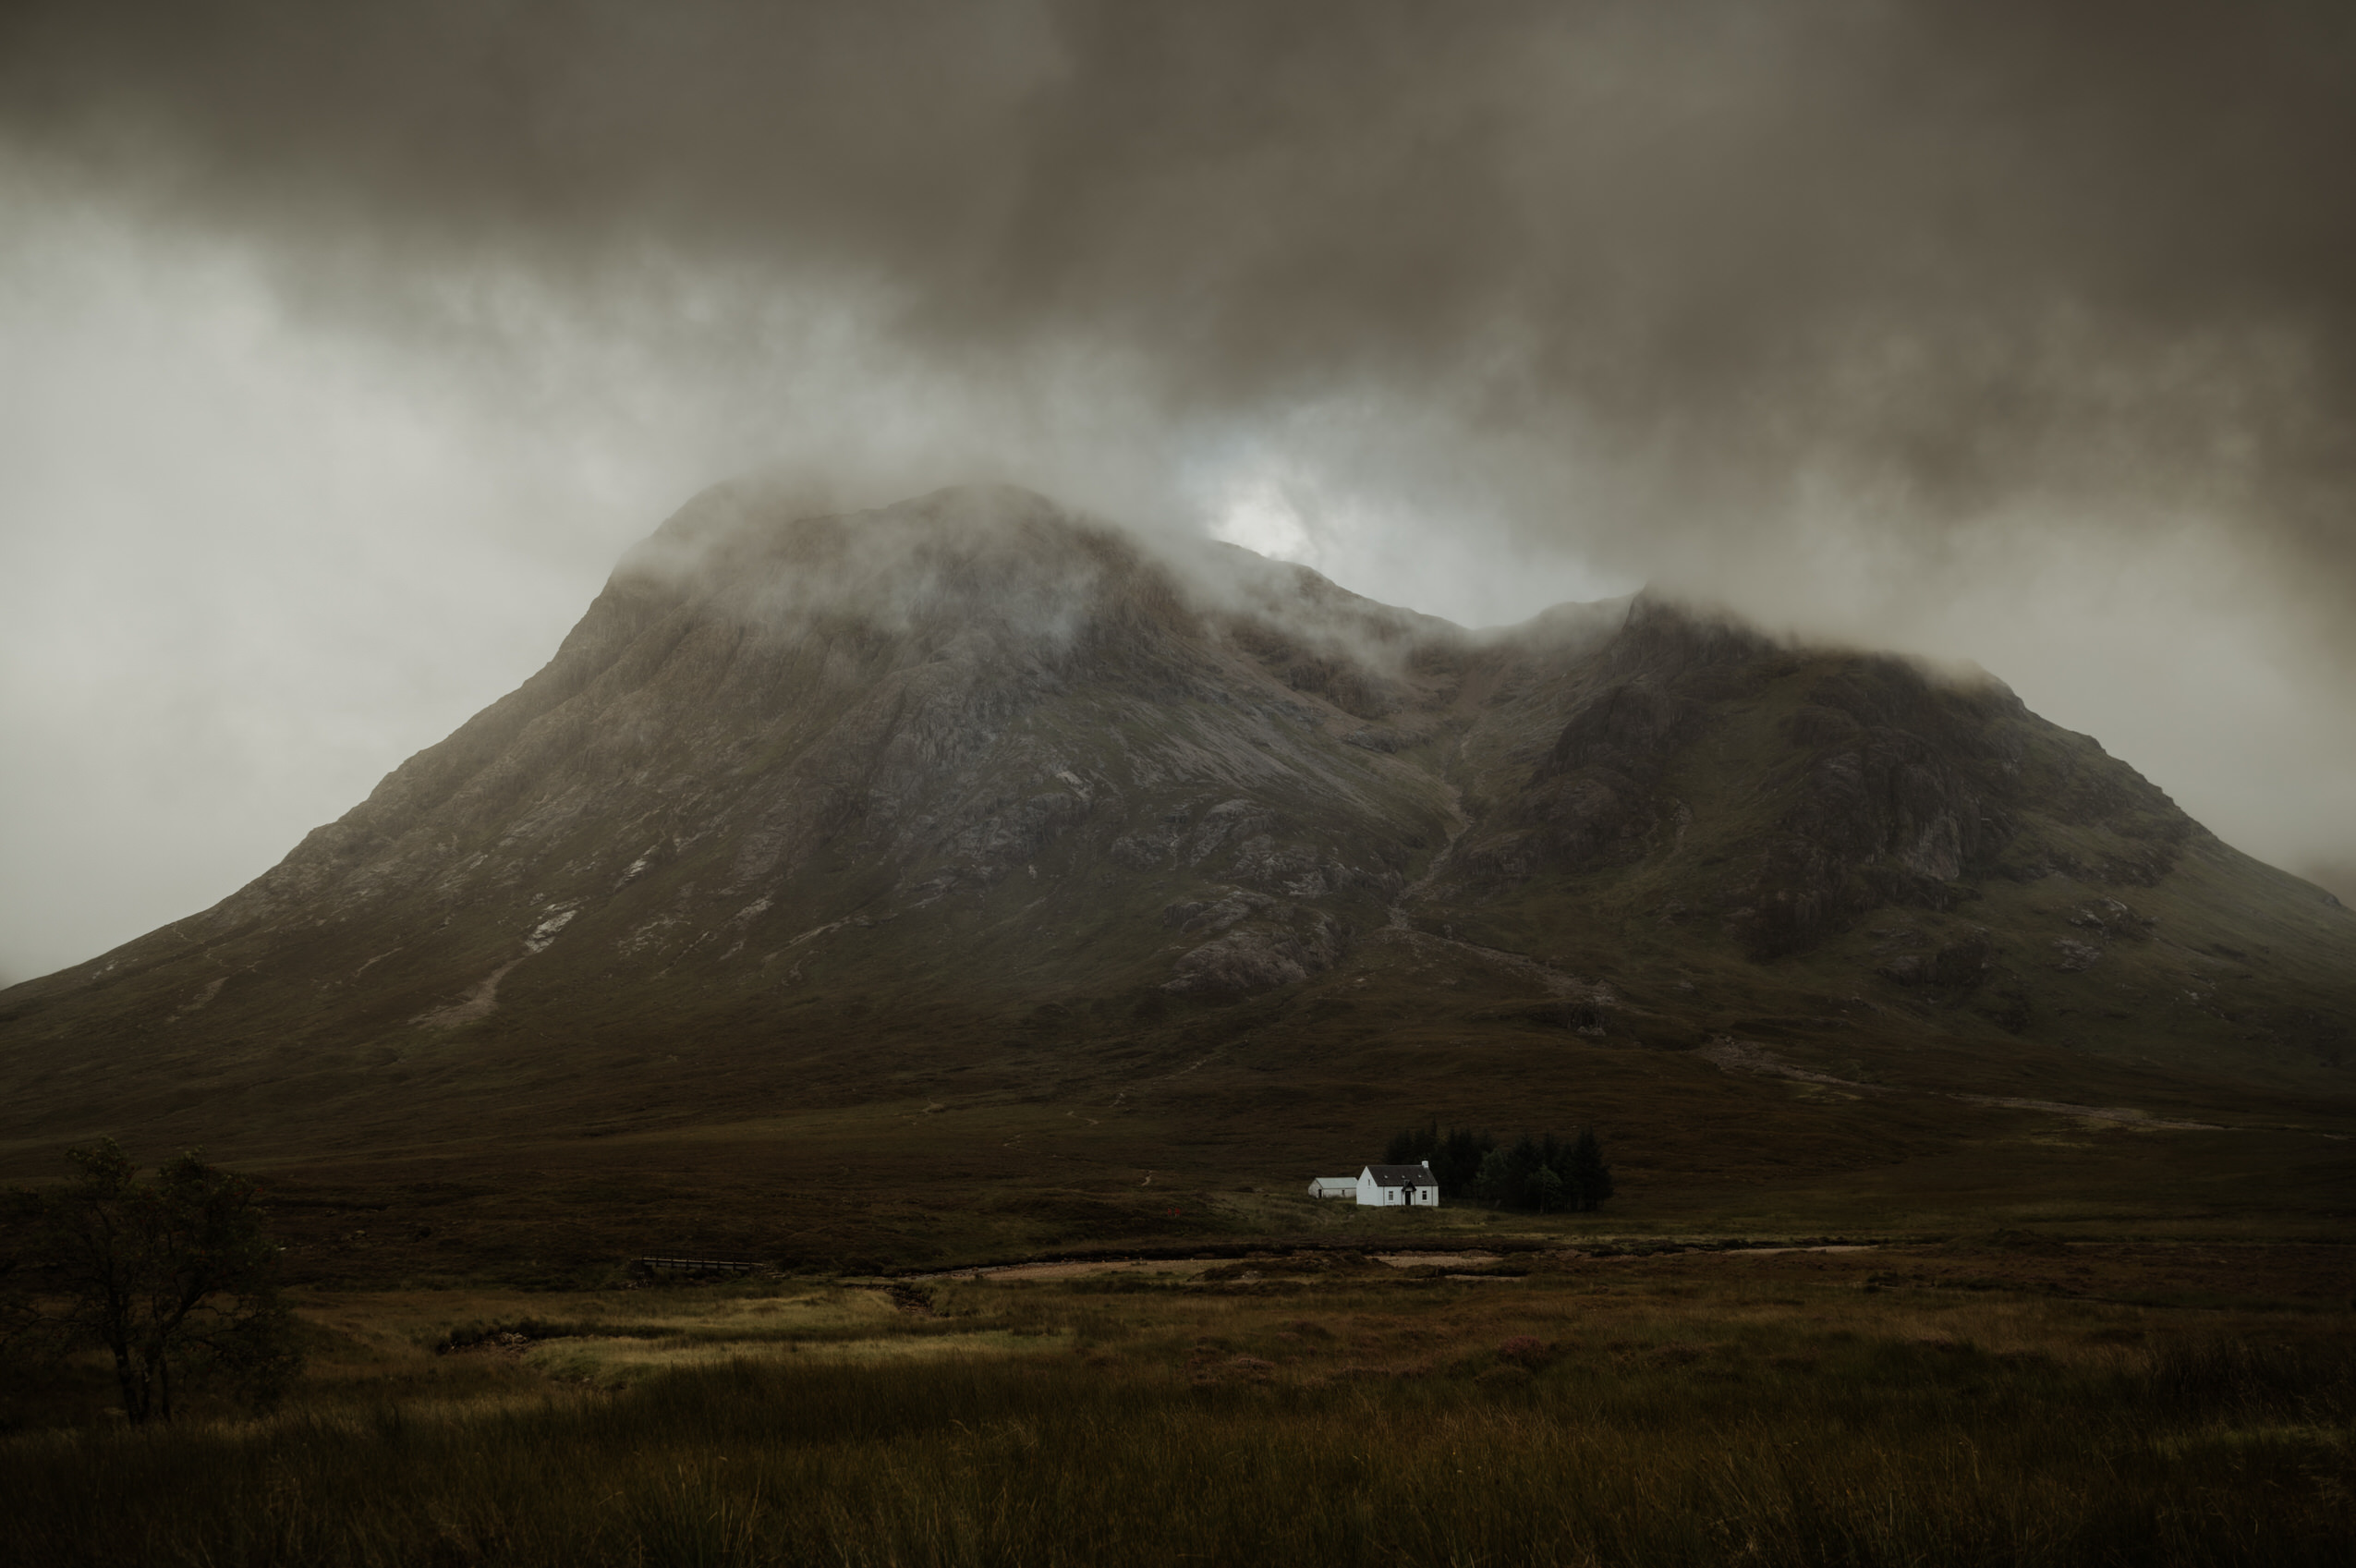 wee white cottage in Glencoe called kagangarbh stood next to the buachaille Etive more mountain